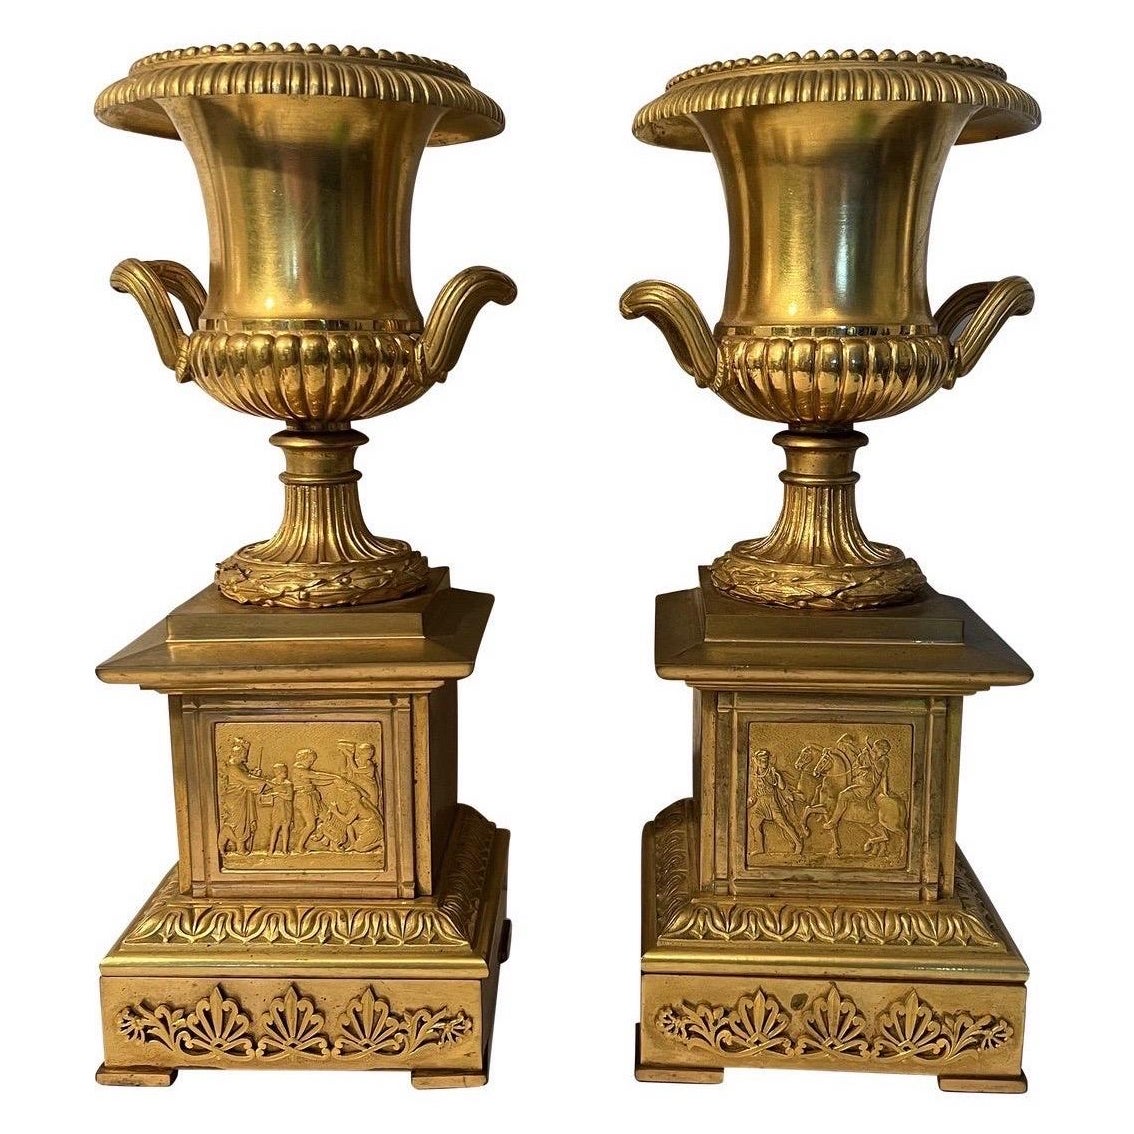 19th Century Neoclassical Gilt Bronze Grand Tour Mounted Urns, a Pair For Sale